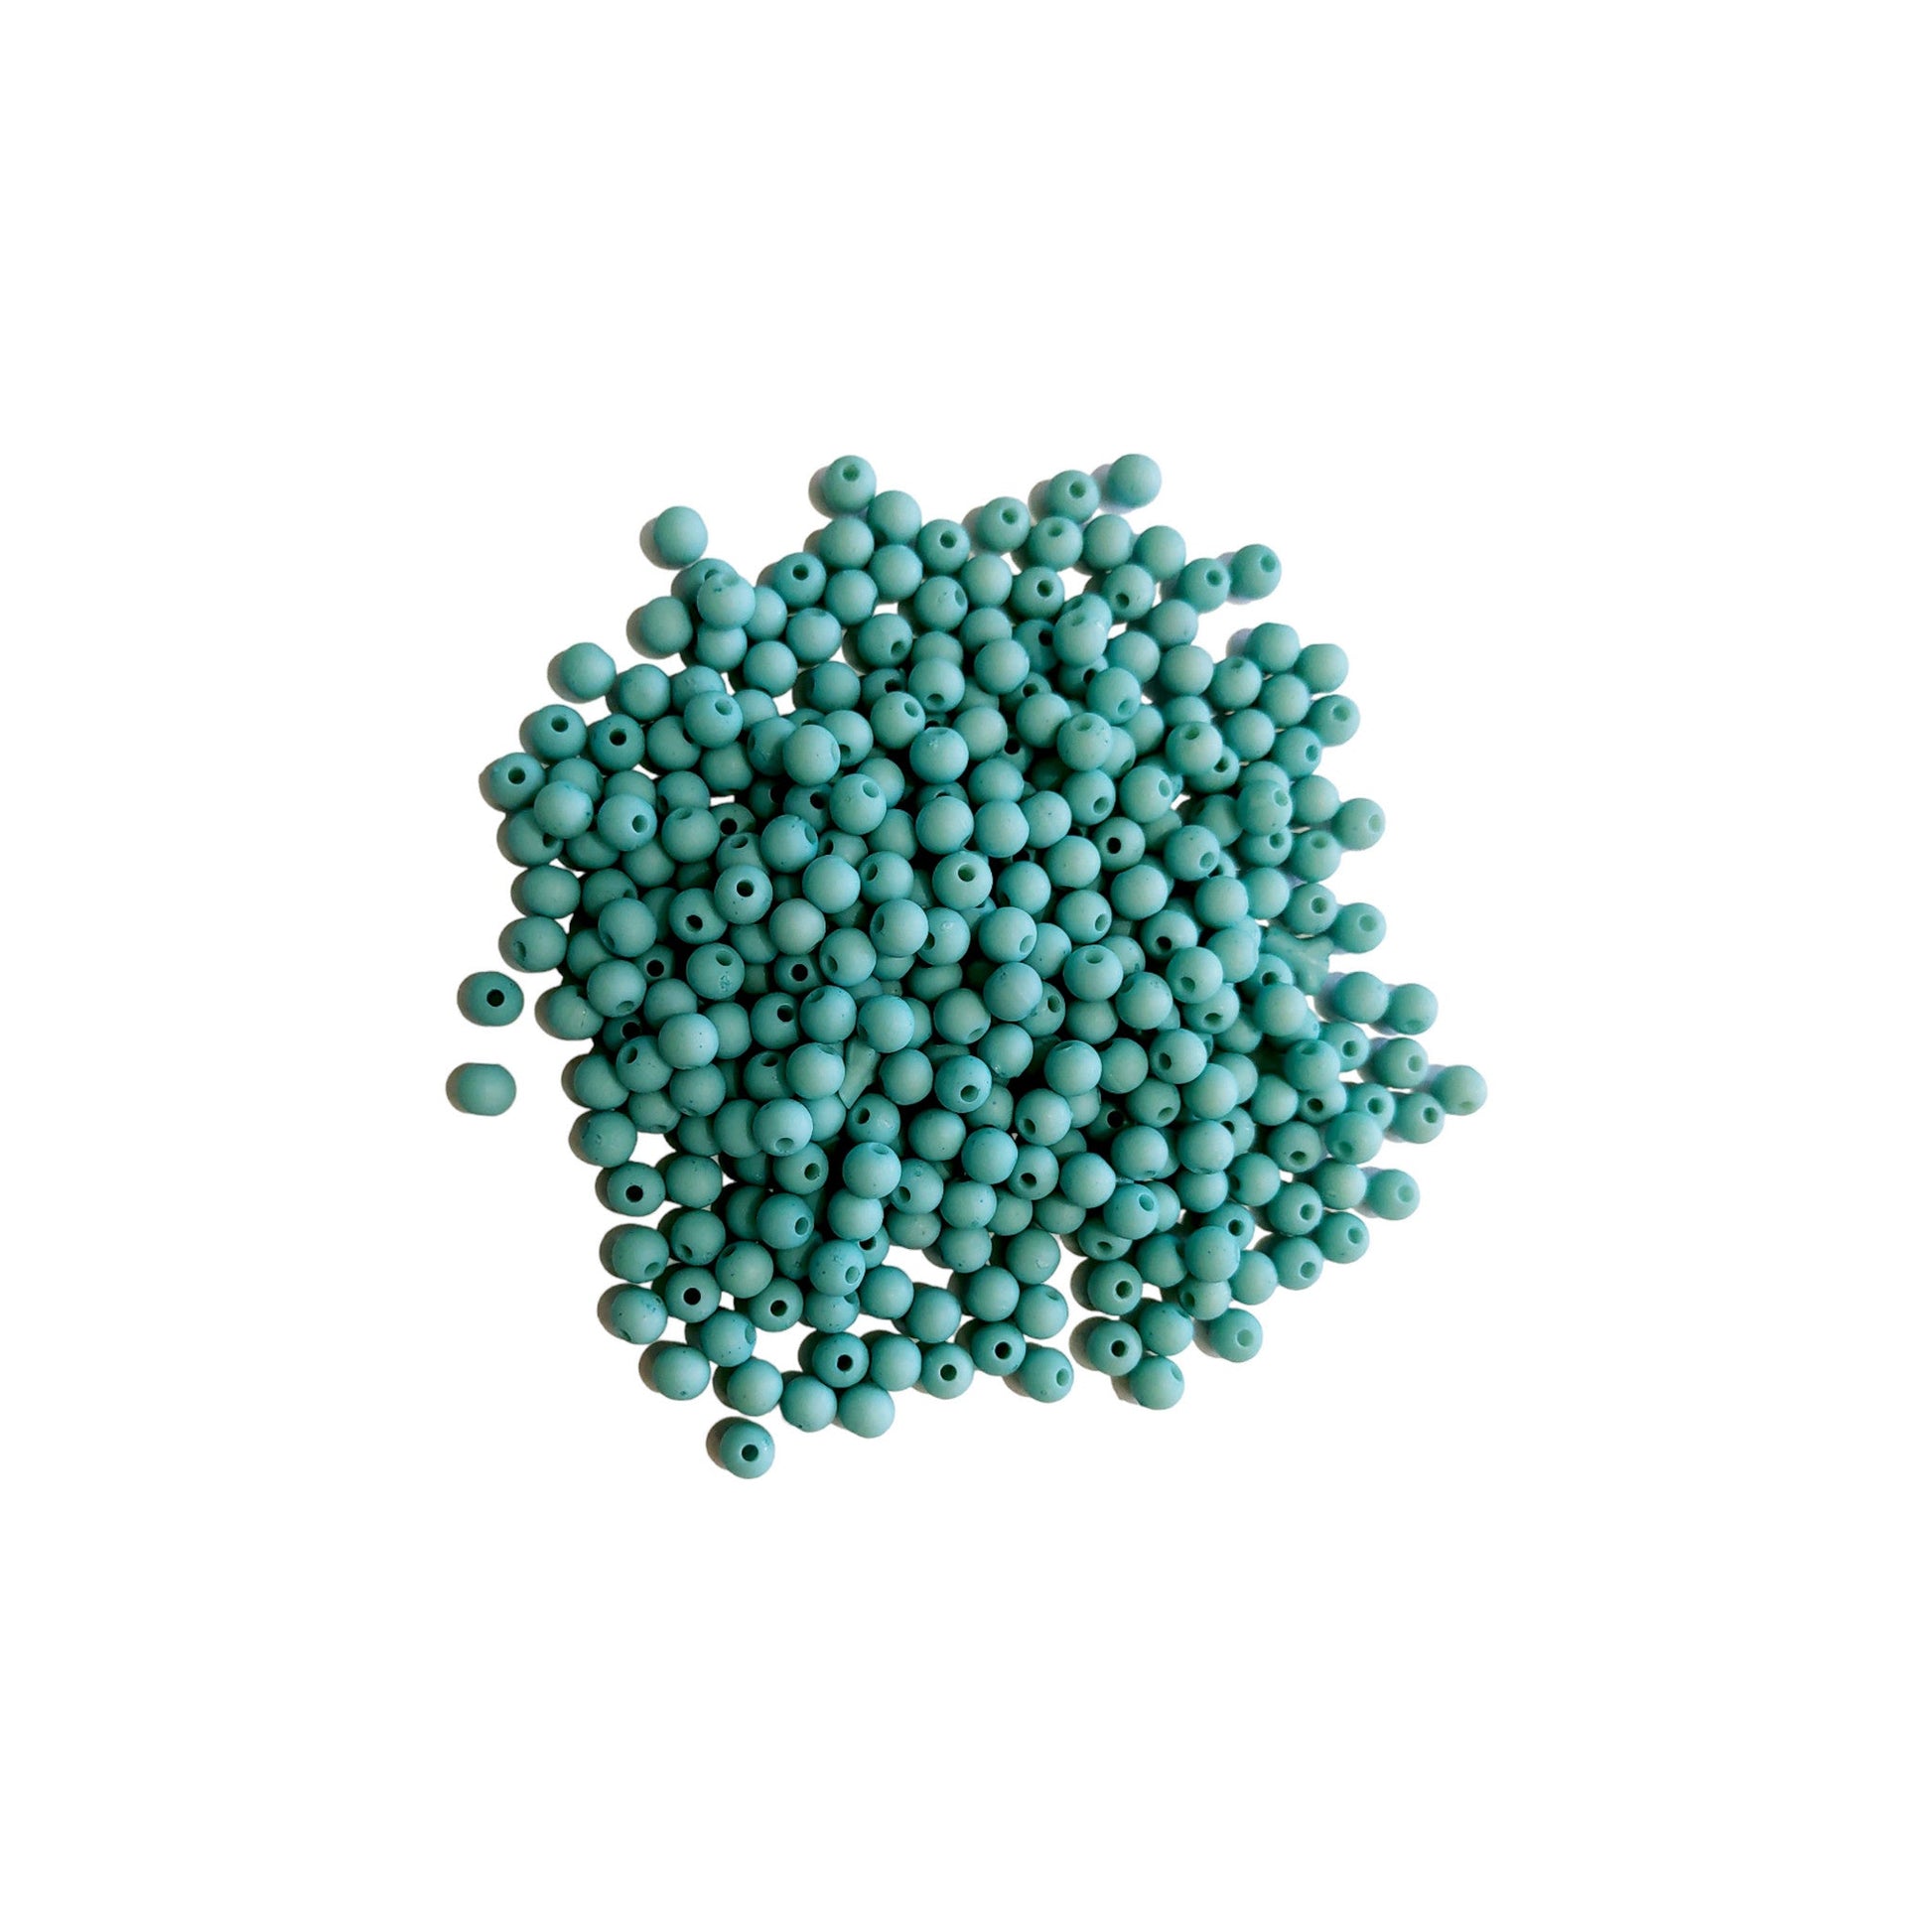 Indian Petals Colored Plastic Round Shaped Beads Ideal for Jewelry designing, Gift, Arts and Craft Making or Decor